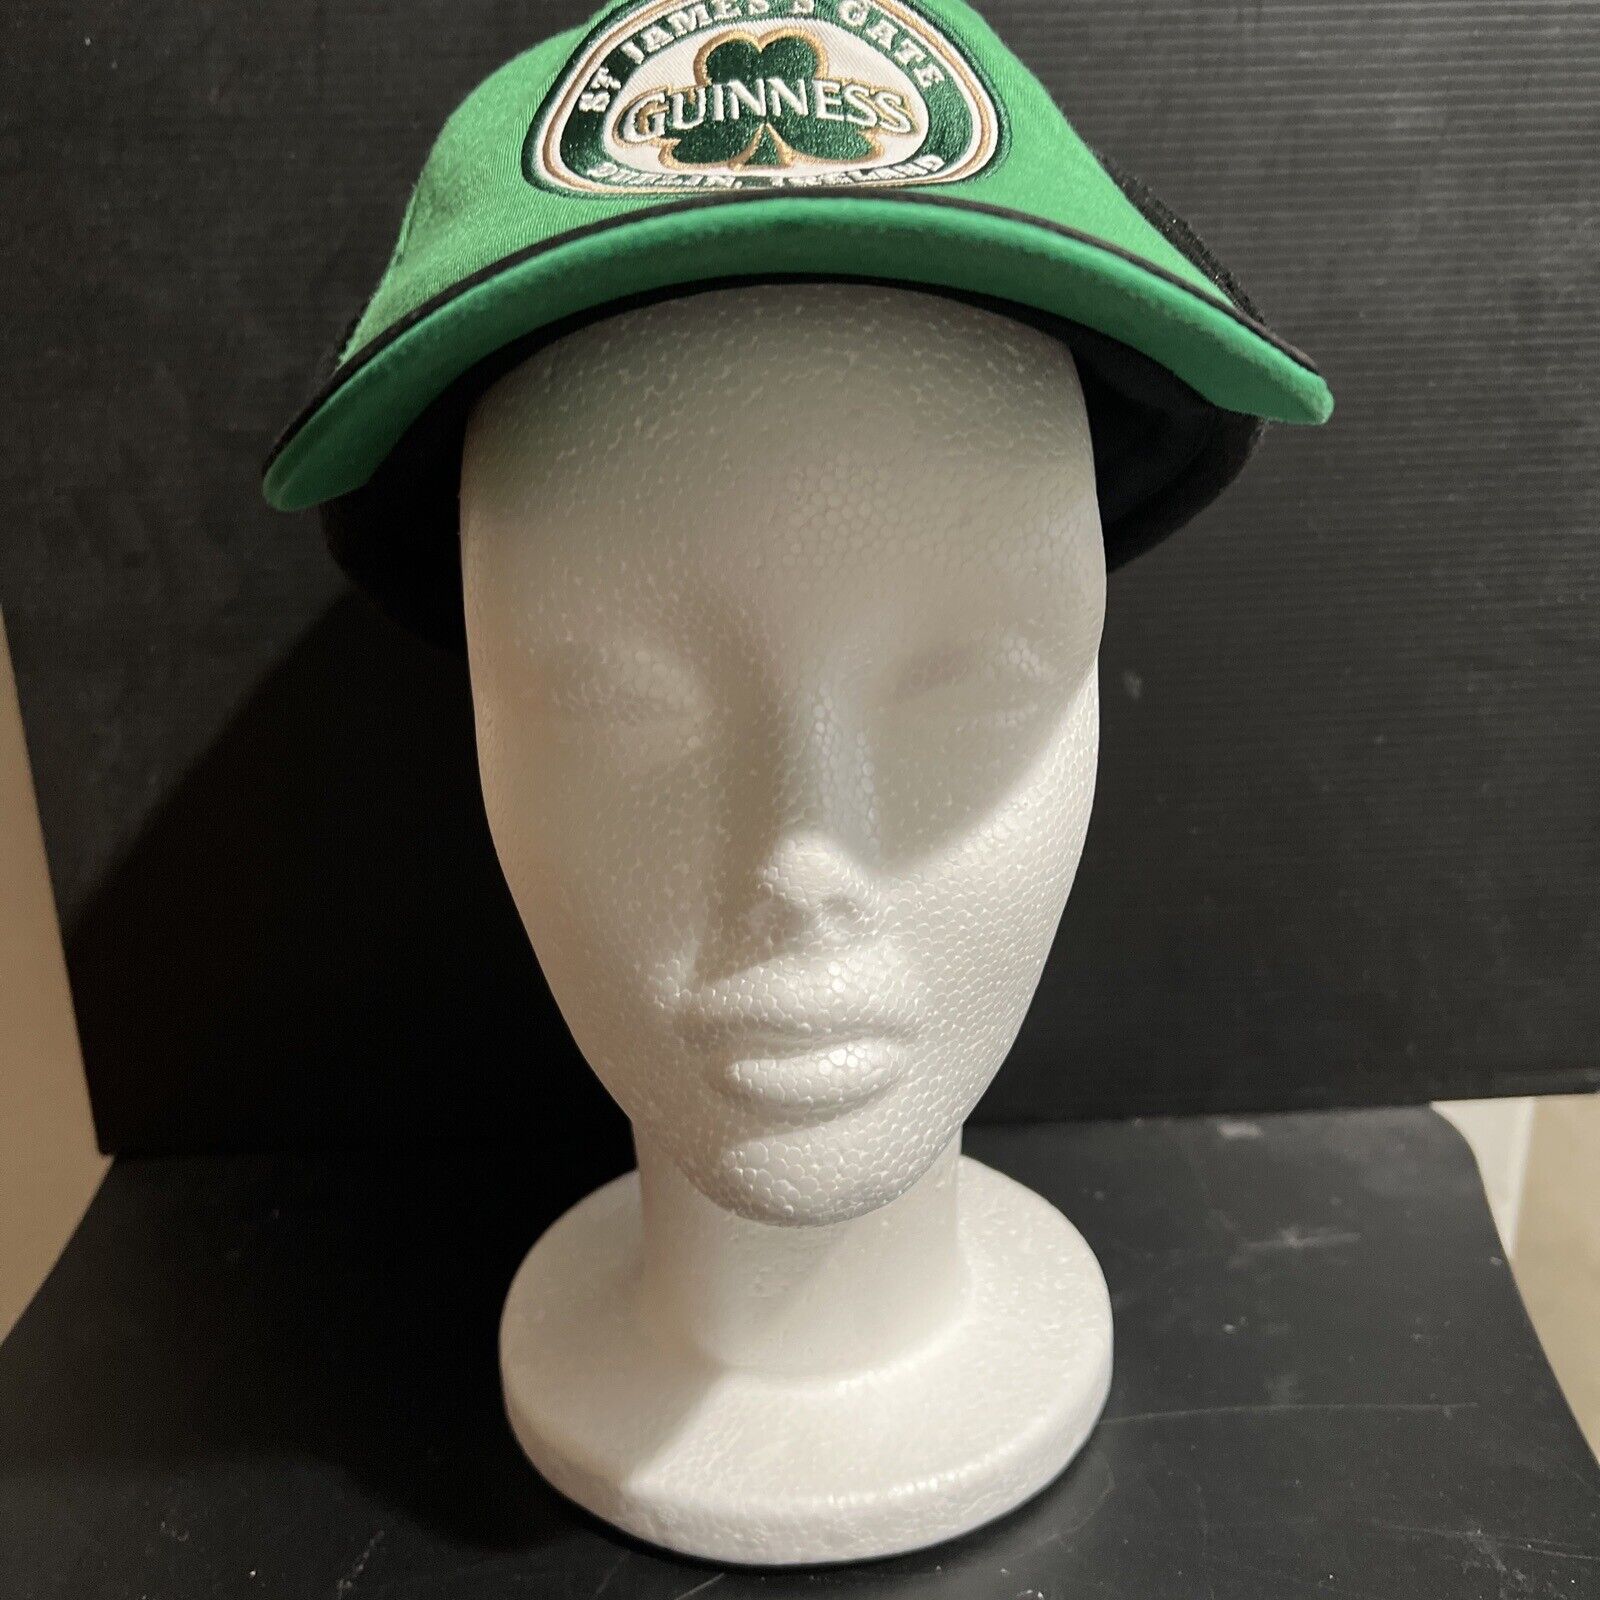 Guinness Black & Green Baseball Cap Hat With Ear Flaps NWOT Beer Stout Winter OS